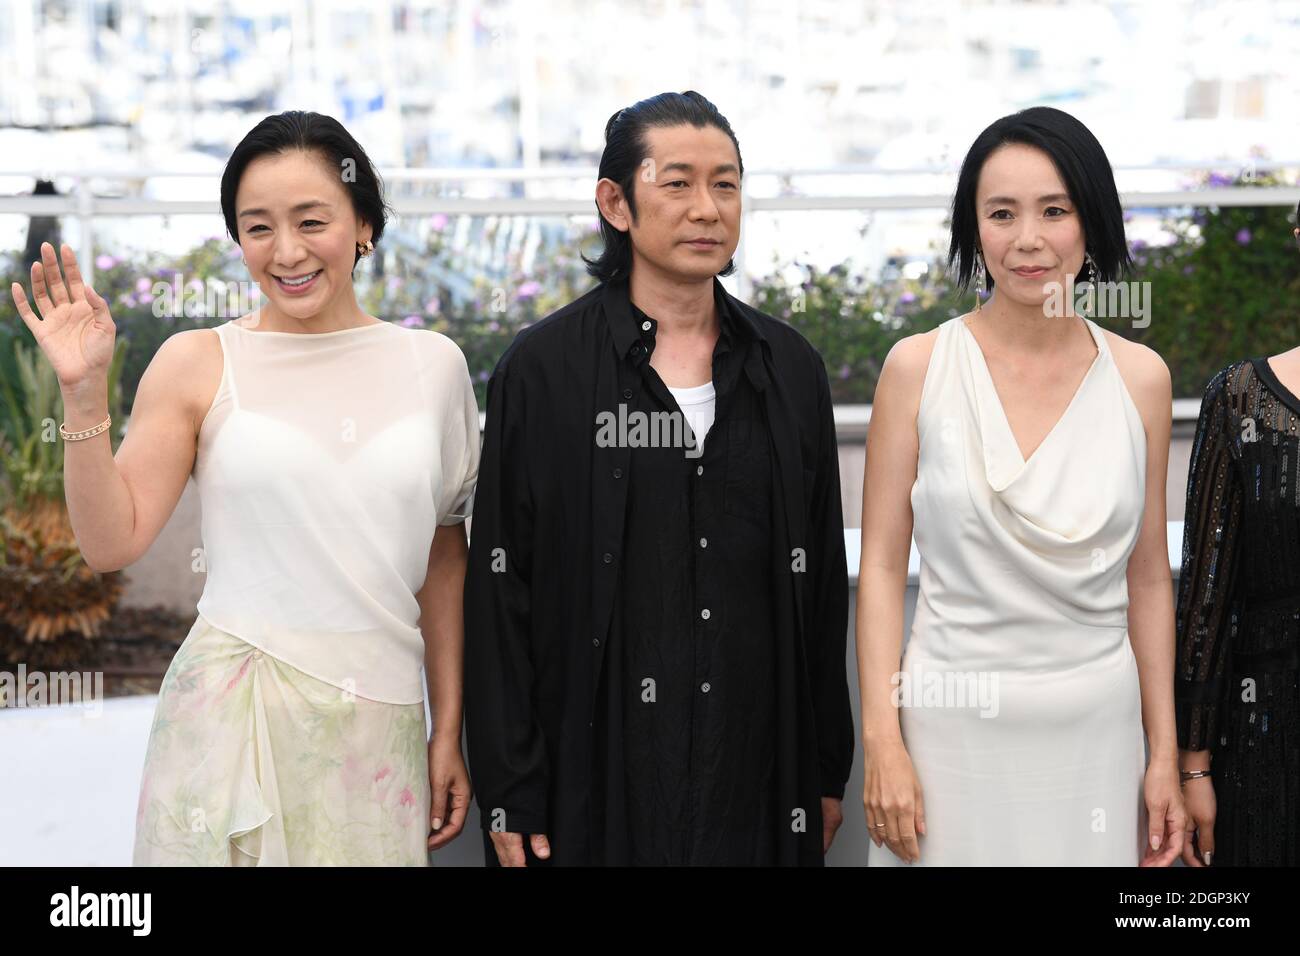 Misuzu Kanno, Masatoshi Nagase and Naomi Kawase attending the Radiance photocall as part of the 70th Cannes Film Festival Stock Photo